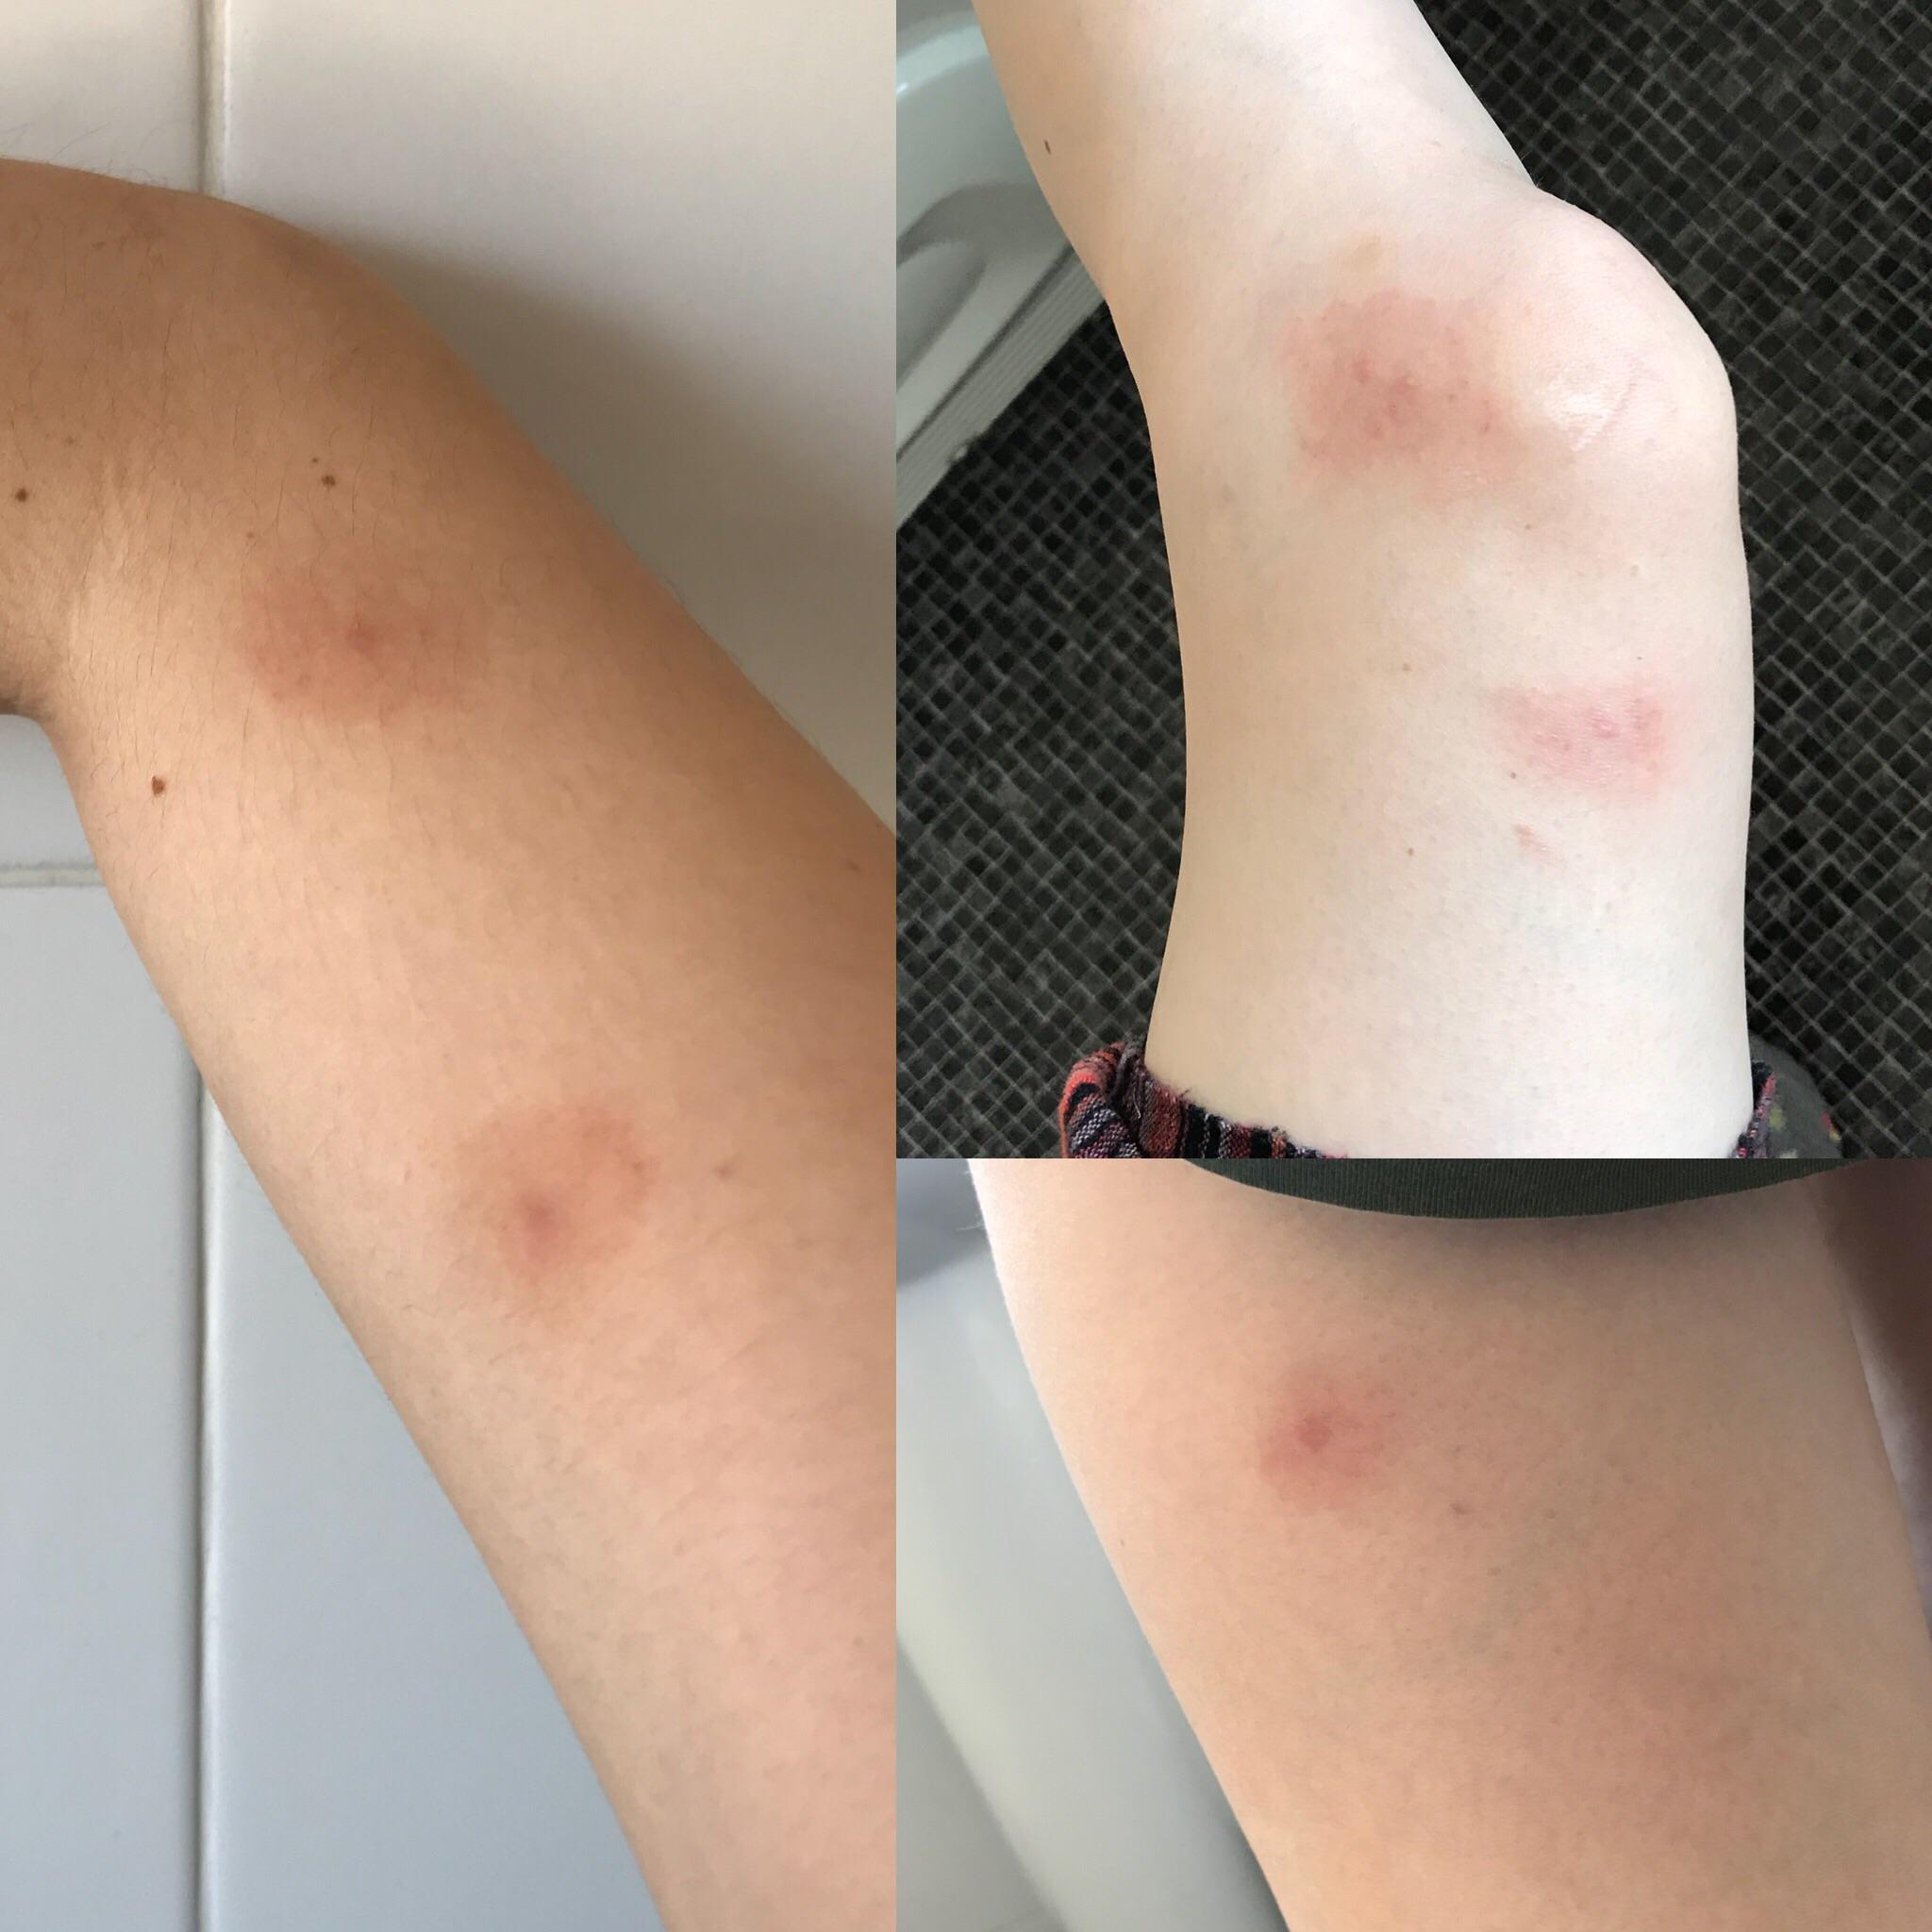 Tick bites/Lyme? Got them about 2 and a half weeks ago and guessing ...